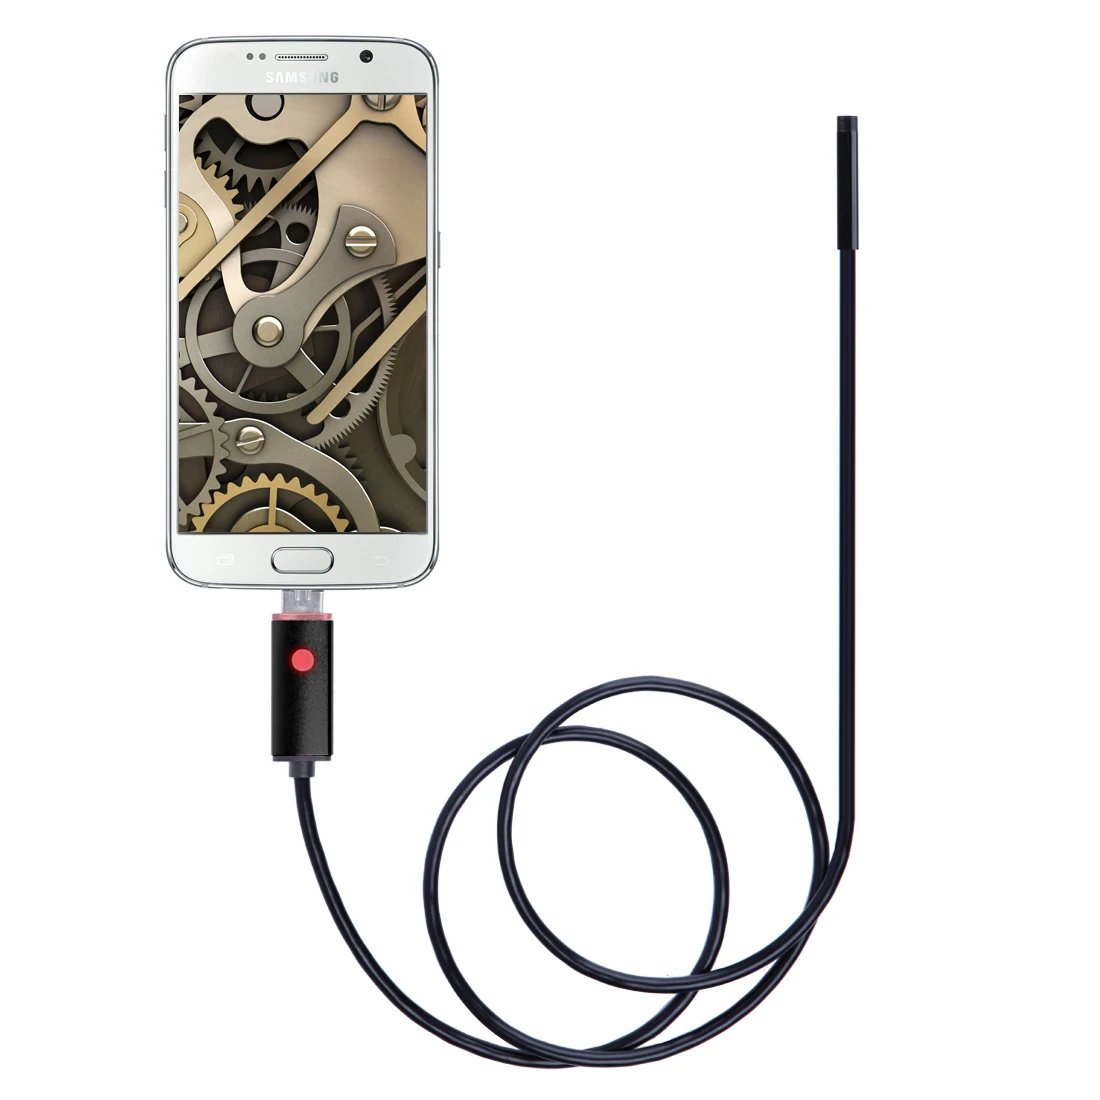 

7MM 1.3MP 2in1 USB Endoscope Camera For OTG Android Smart Phone and PC CMOS Borescope Otoscope Digital Microscope